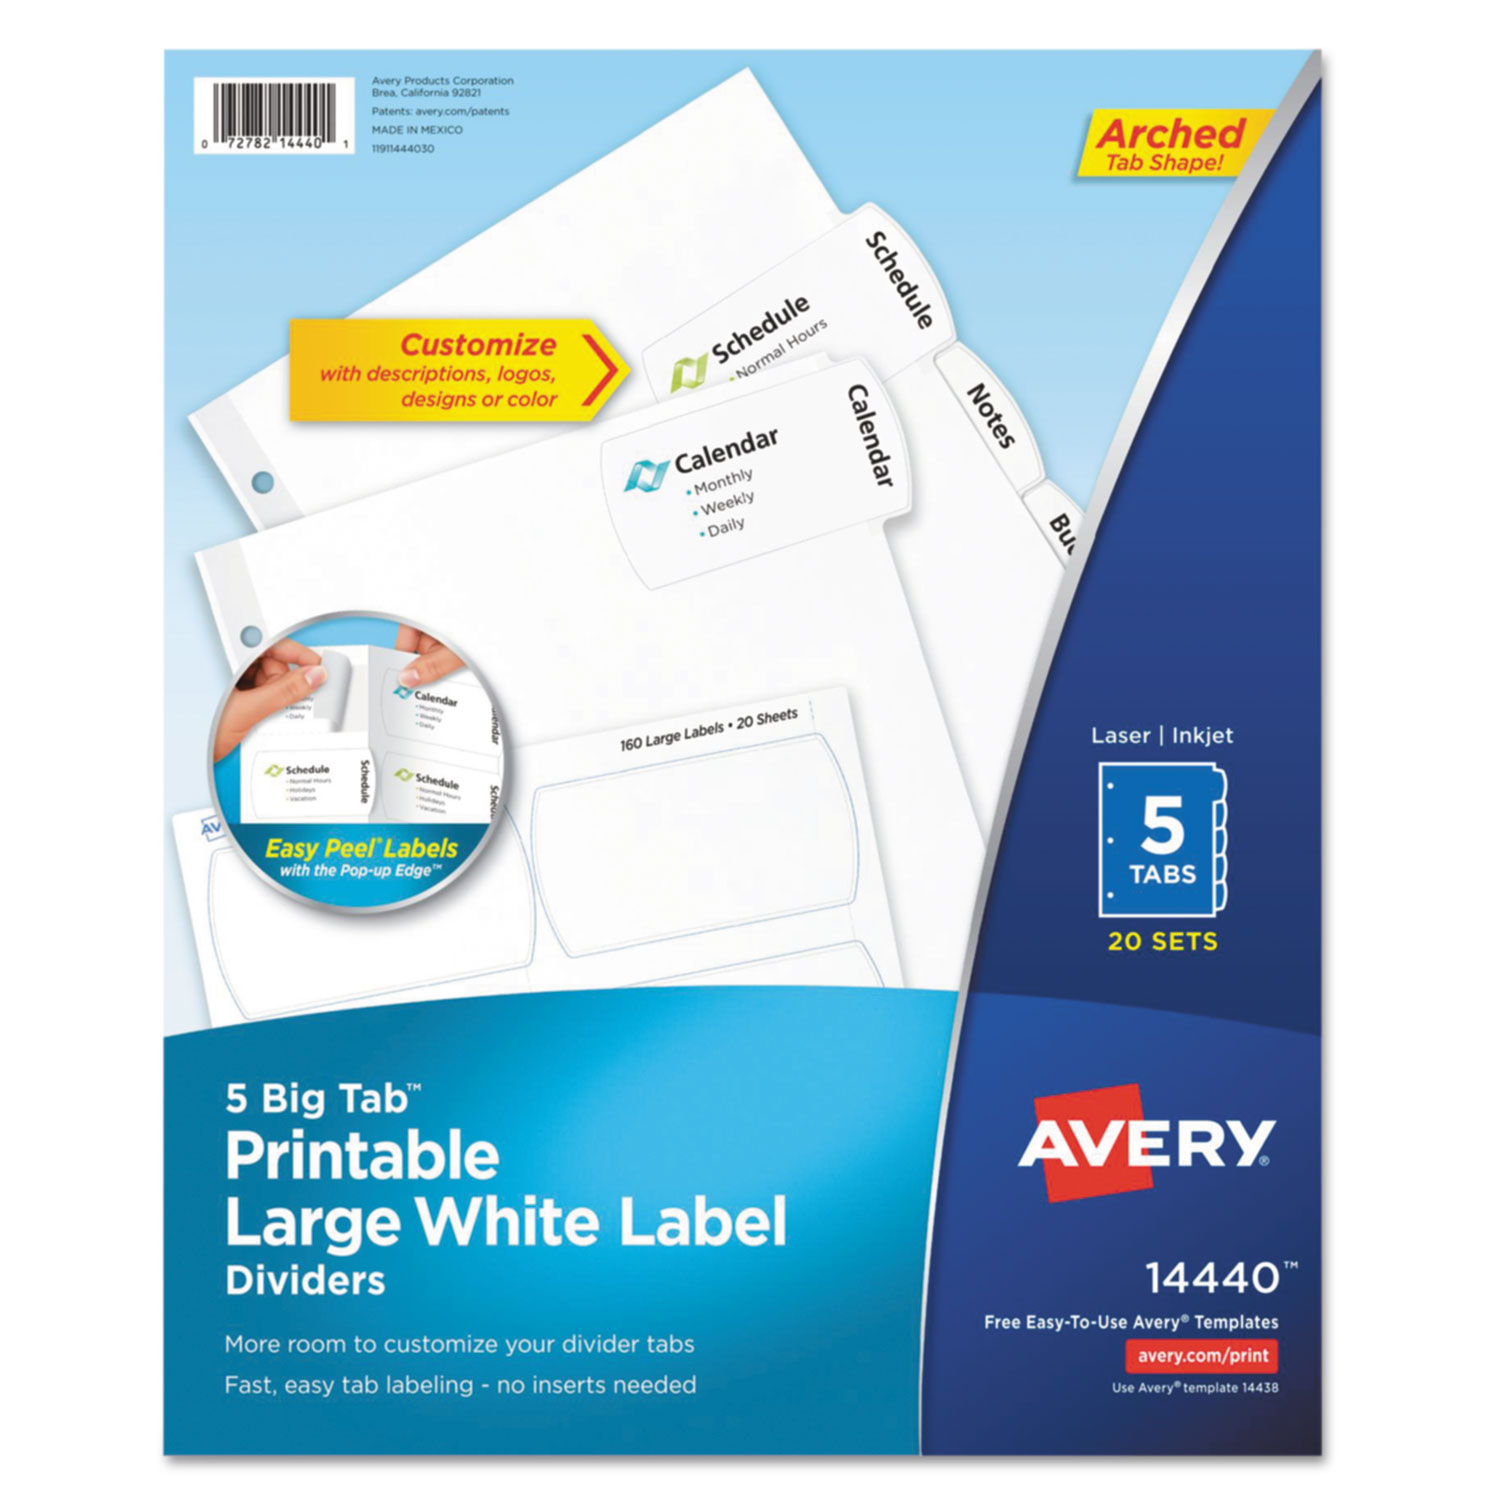 1 Set Index Maker Avery 8-Tab Sheet Protectors Dividers Printable Easy Peel Clear Labels New White Tabs 